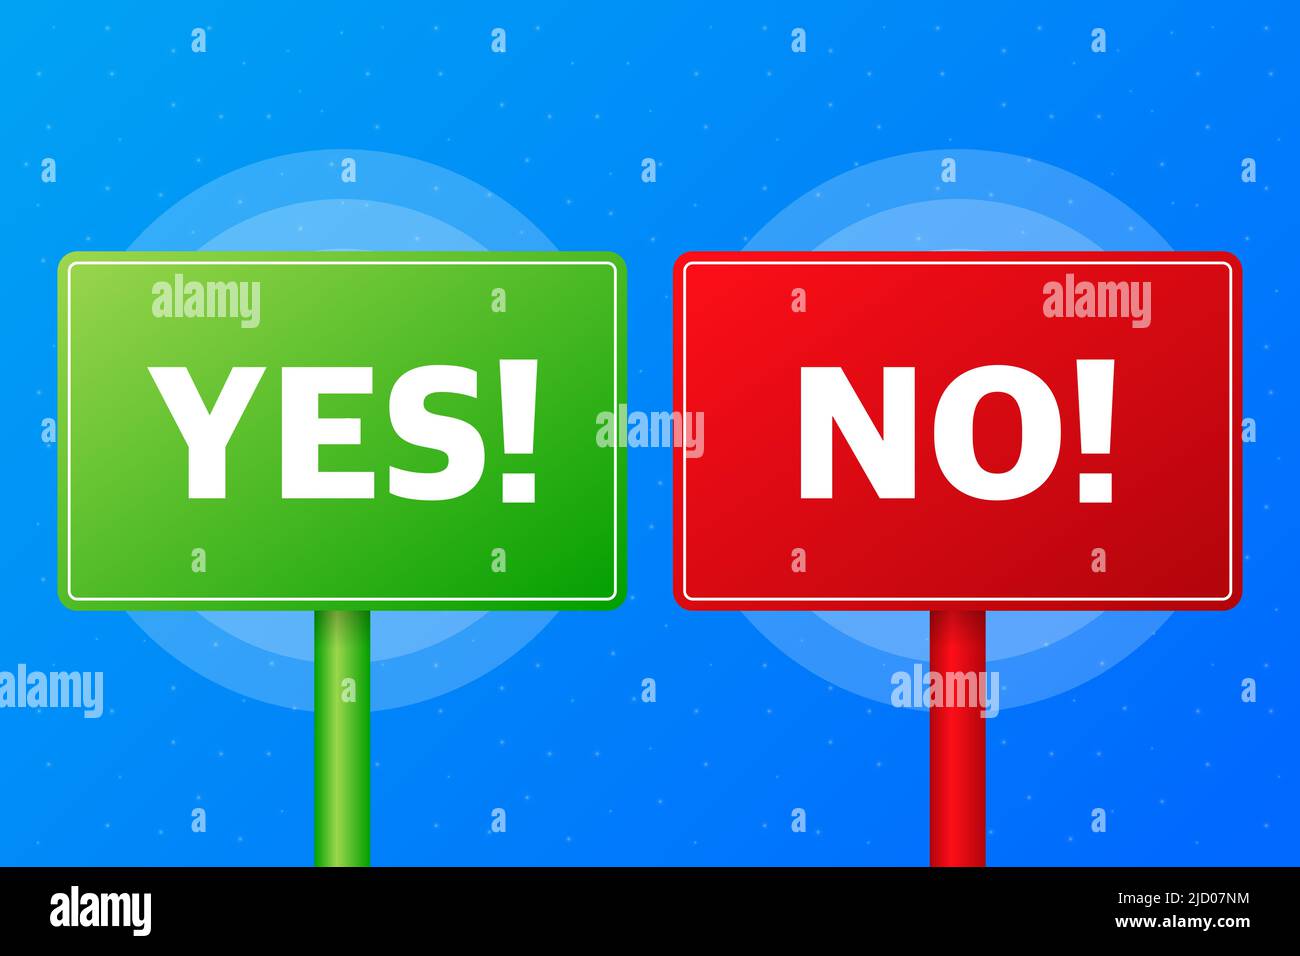 Yes or no realistic red and green table on blue background. Vector illustration. Stock Vector